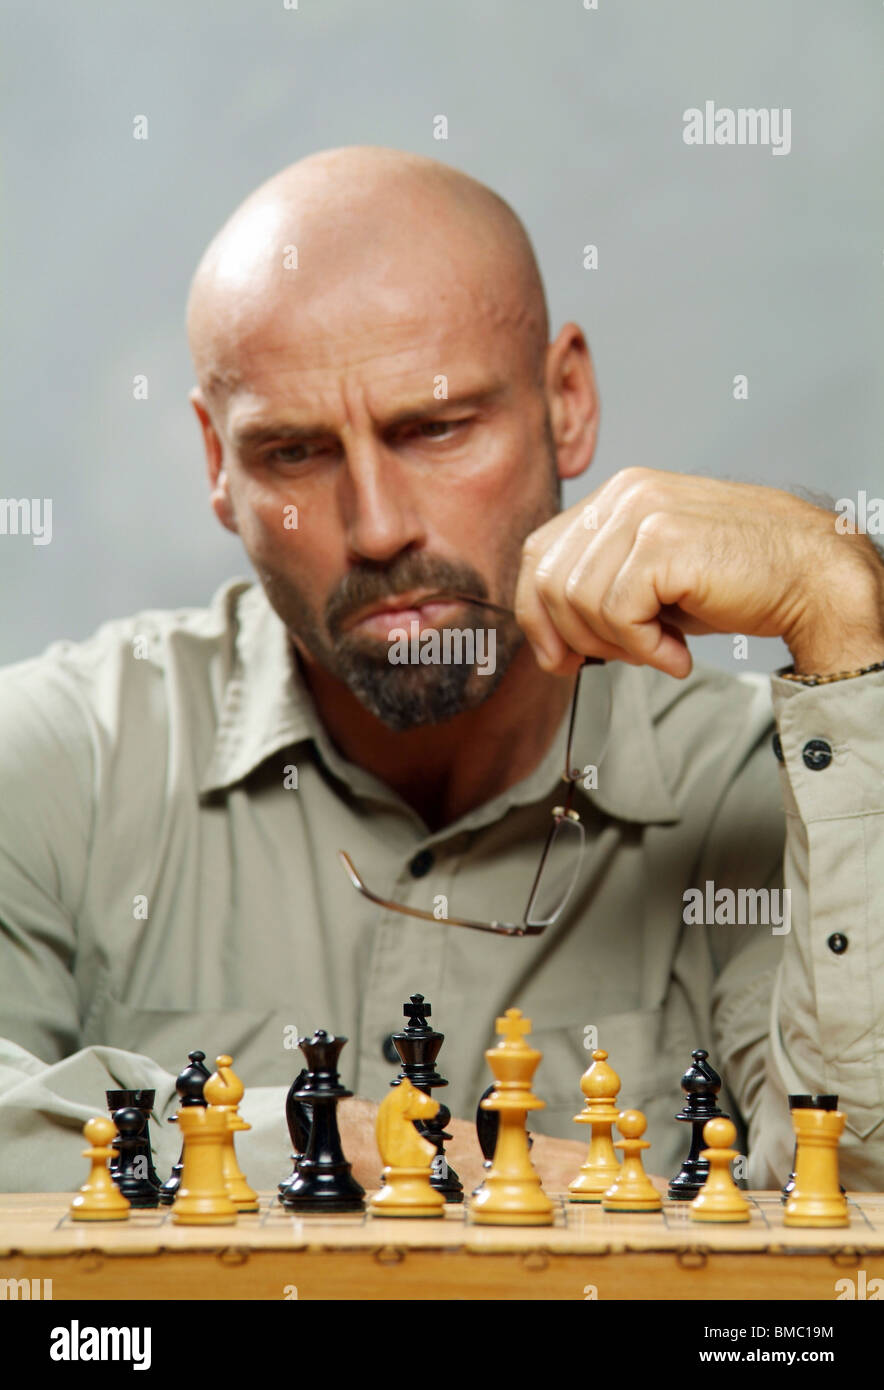 A chess player Stock Photo